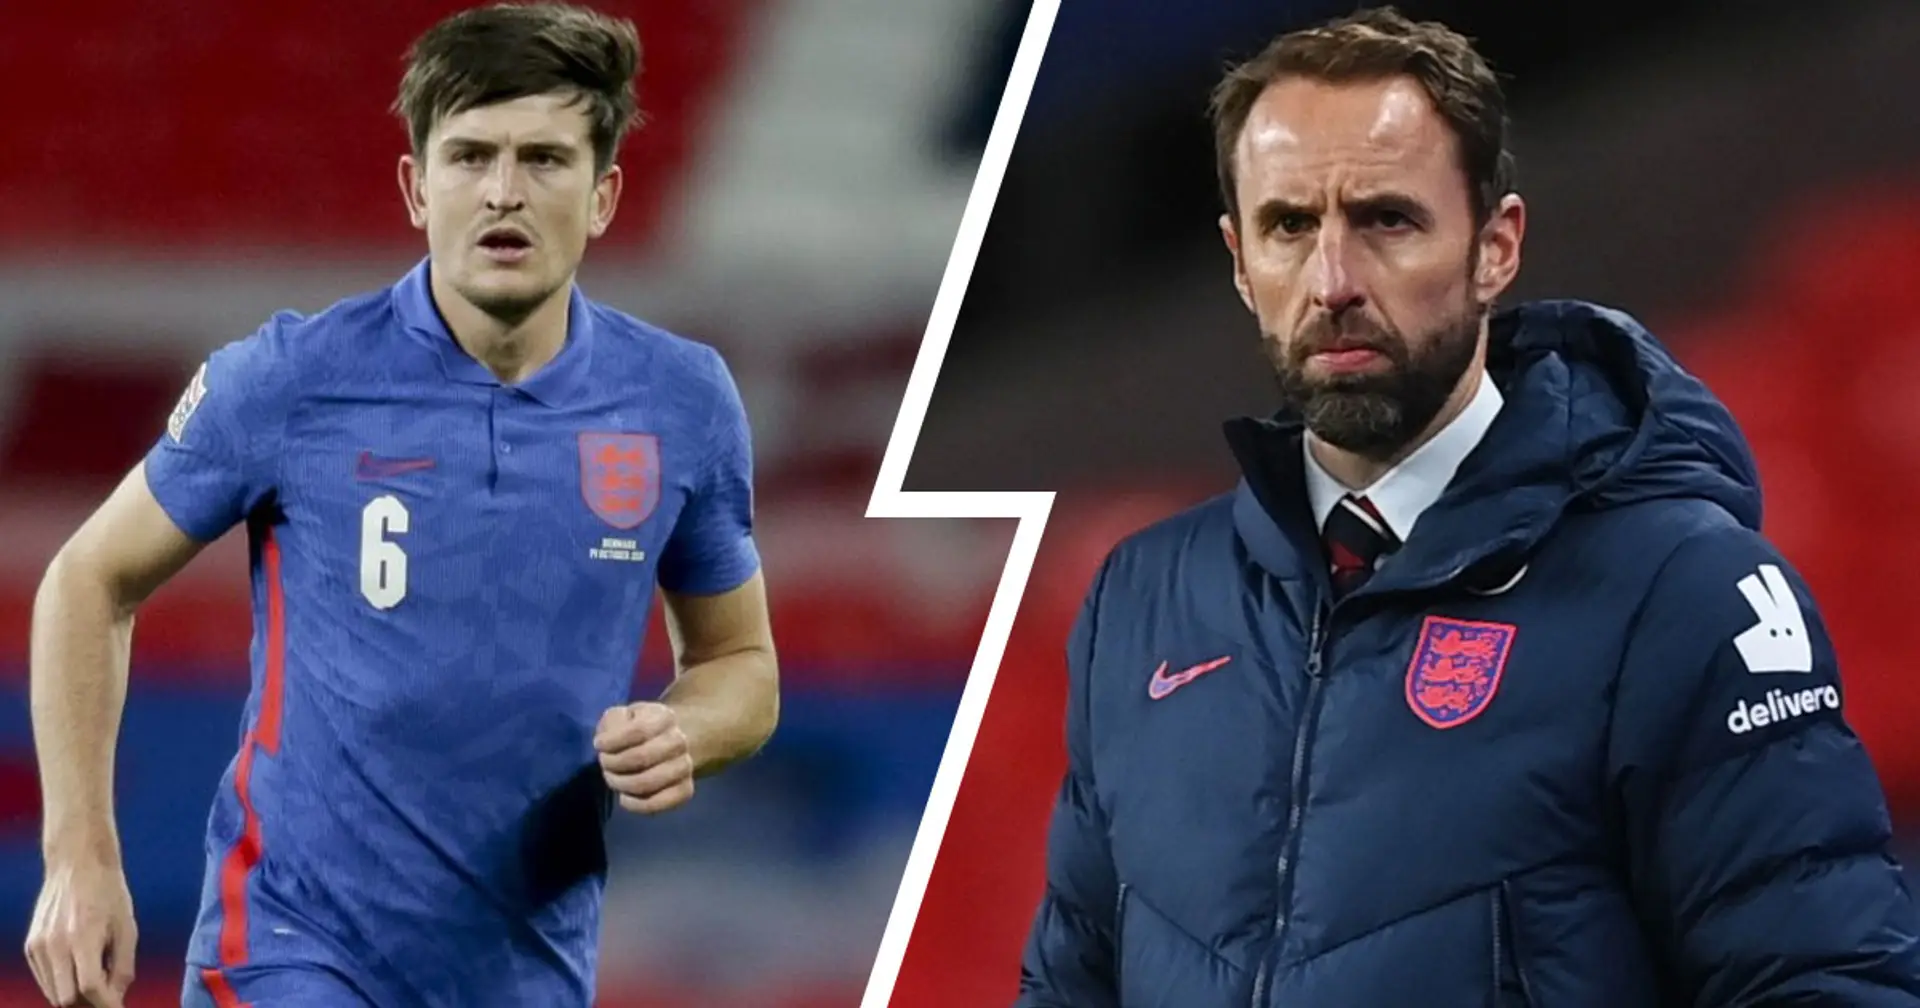 Maguire and Rashford not in form but neutrals (and Roy Keane) point to Gareth Southgate as main culprit